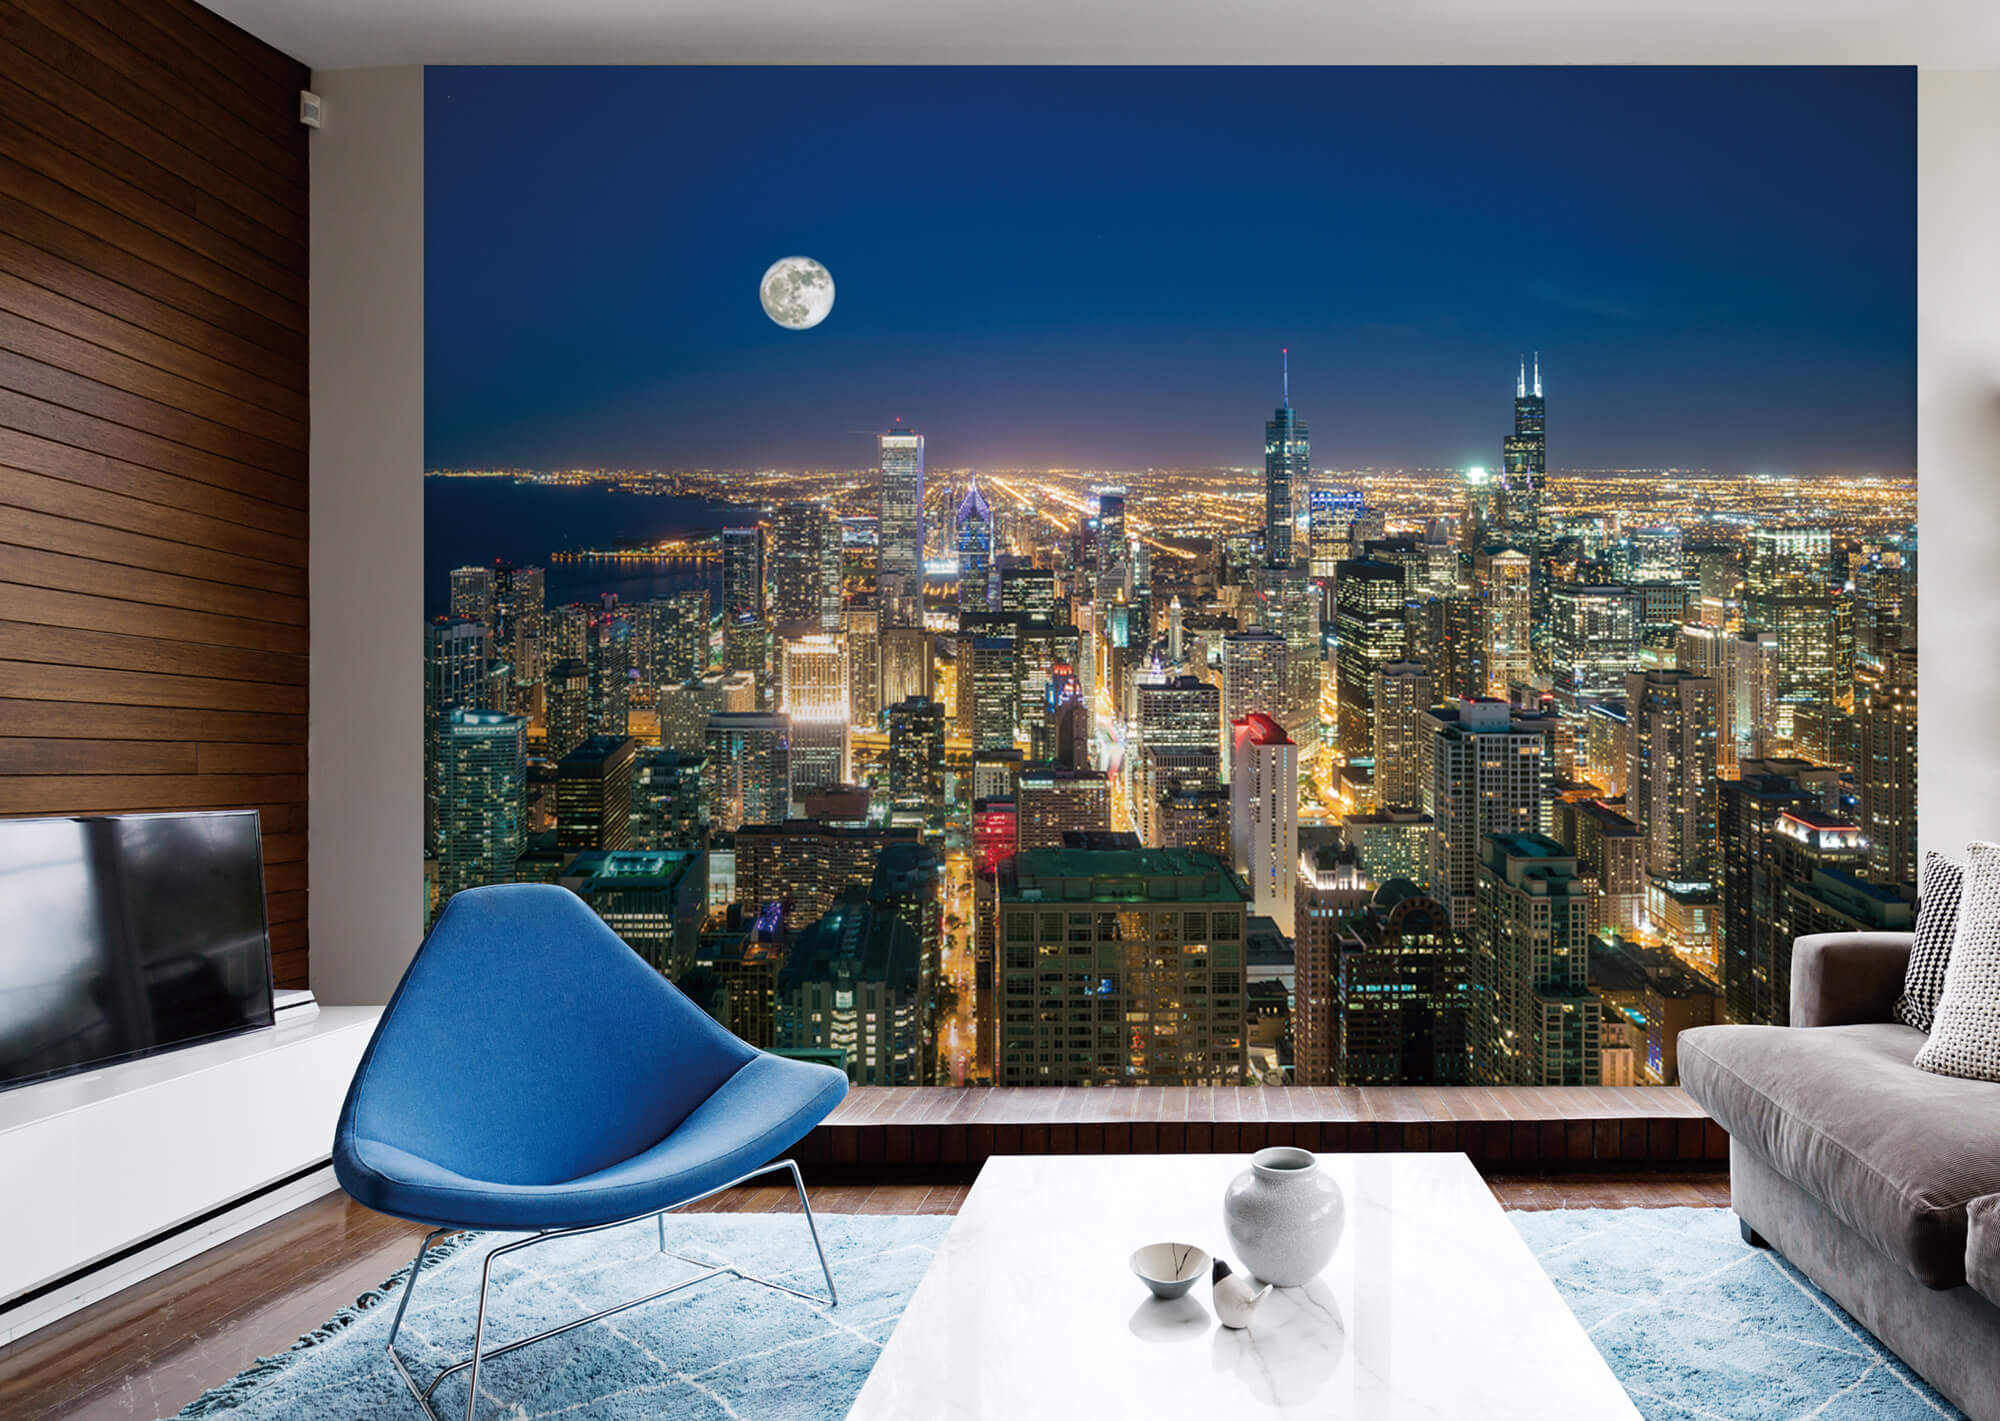 Chicago skyline Photo Wallpaper Wall Mural Home Decor Bedroom Giant Paper Poster 